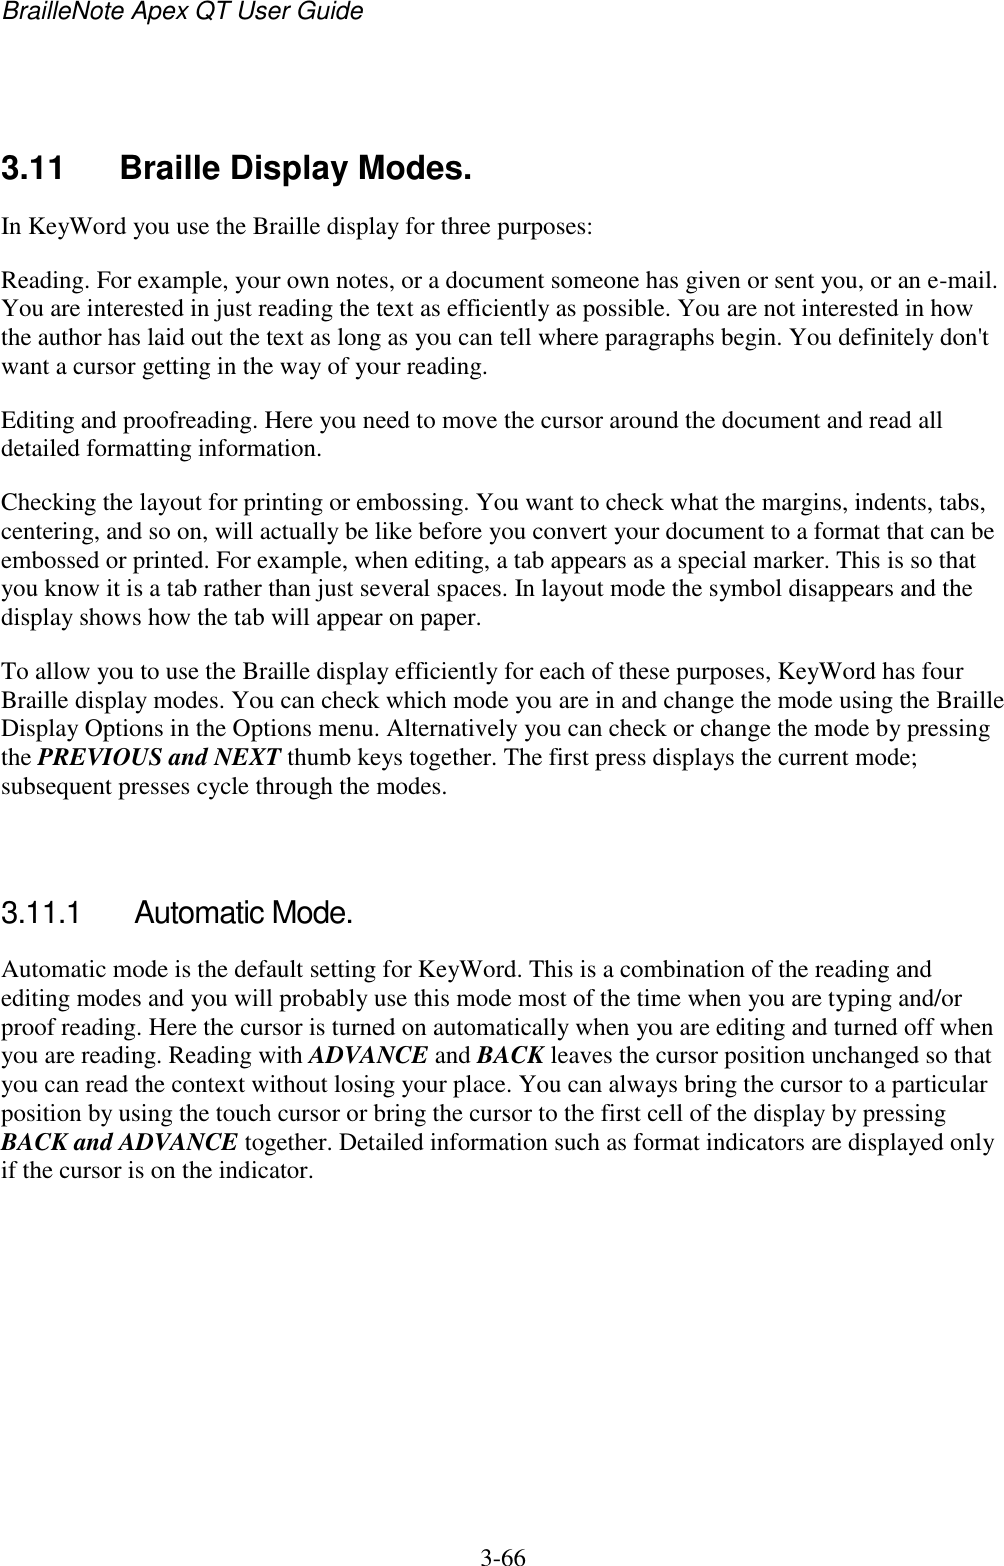 BrailleNote Apex QT User Guide  3-66     3.11  Braille Display Modes. In KeyWord you use the Braille display for three purposes: Reading. For example, your own notes, or a document someone has given or sent you, or an e-mail. You are interested in just reading the text as efficiently as possible. You are not interested in how the author has laid out the text as long as you can tell where paragraphs begin. You definitely don&apos;t want a cursor getting in the way of your reading. Editing and proofreading. Here you need to move the cursor around the document and read all detailed formatting information. Checking the layout for printing or embossing. You want to check what the margins, indents, tabs, centering, and so on, will actually be like before you convert your document to a format that can be embossed or printed. For example, when editing, a tab appears as a special marker. This is so that you know it is a tab rather than just several spaces. In layout mode the symbol disappears and the display shows how the tab will appear on paper. To allow you to use the Braille display efficiently for each of these purposes, KeyWord has four Braille display modes. You can check which mode you are in and change the mode using the Braille Display Options in the Options menu. Alternatively you can check or change the mode by pressing the PREVIOUS and NEXT thumb keys together. The first press displays the current mode; subsequent presses cycle through the modes.   3.11.1  Automatic Mode. Automatic mode is the default setting for KeyWord. This is a combination of the reading and editing modes and you will probably use this mode most of the time when you are typing and/or proof reading. Here the cursor is turned on automatically when you are editing and turned off when you are reading. Reading with ADVANCE and BACK leaves the cursor position unchanged so that you can read the context without losing your place. You can always bring the cursor to a particular position by using the touch cursor or bring the cursor to the first cell of the display by pressing BACK and ADVANCE together. Detailed information such as format indicators are displayed only if the cursor is on the indicator.   